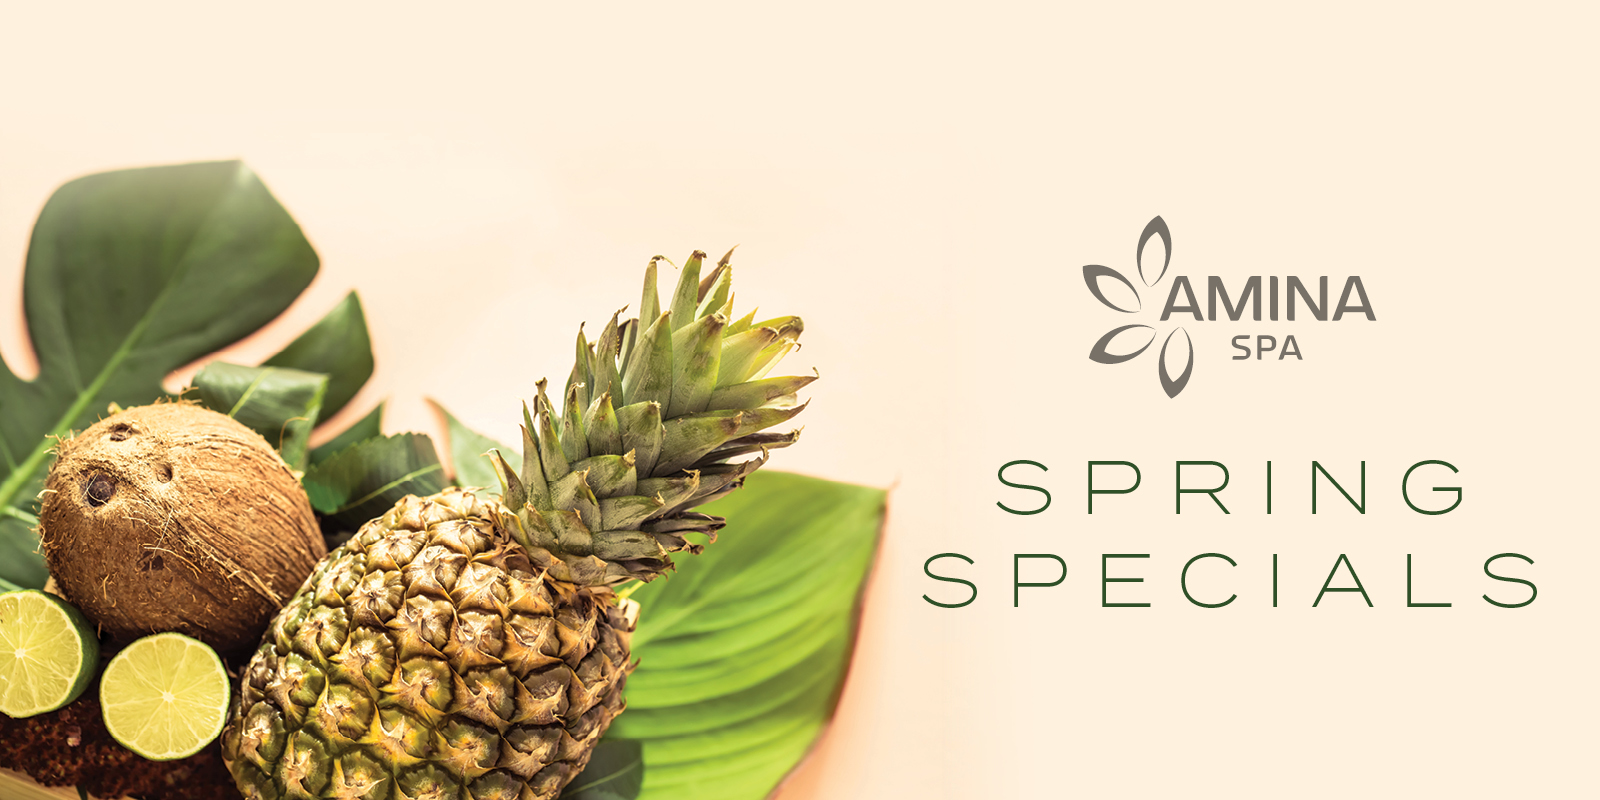 Spring Specials creative for Amina Spa showing a tropical vibe with coconuts and pineapples